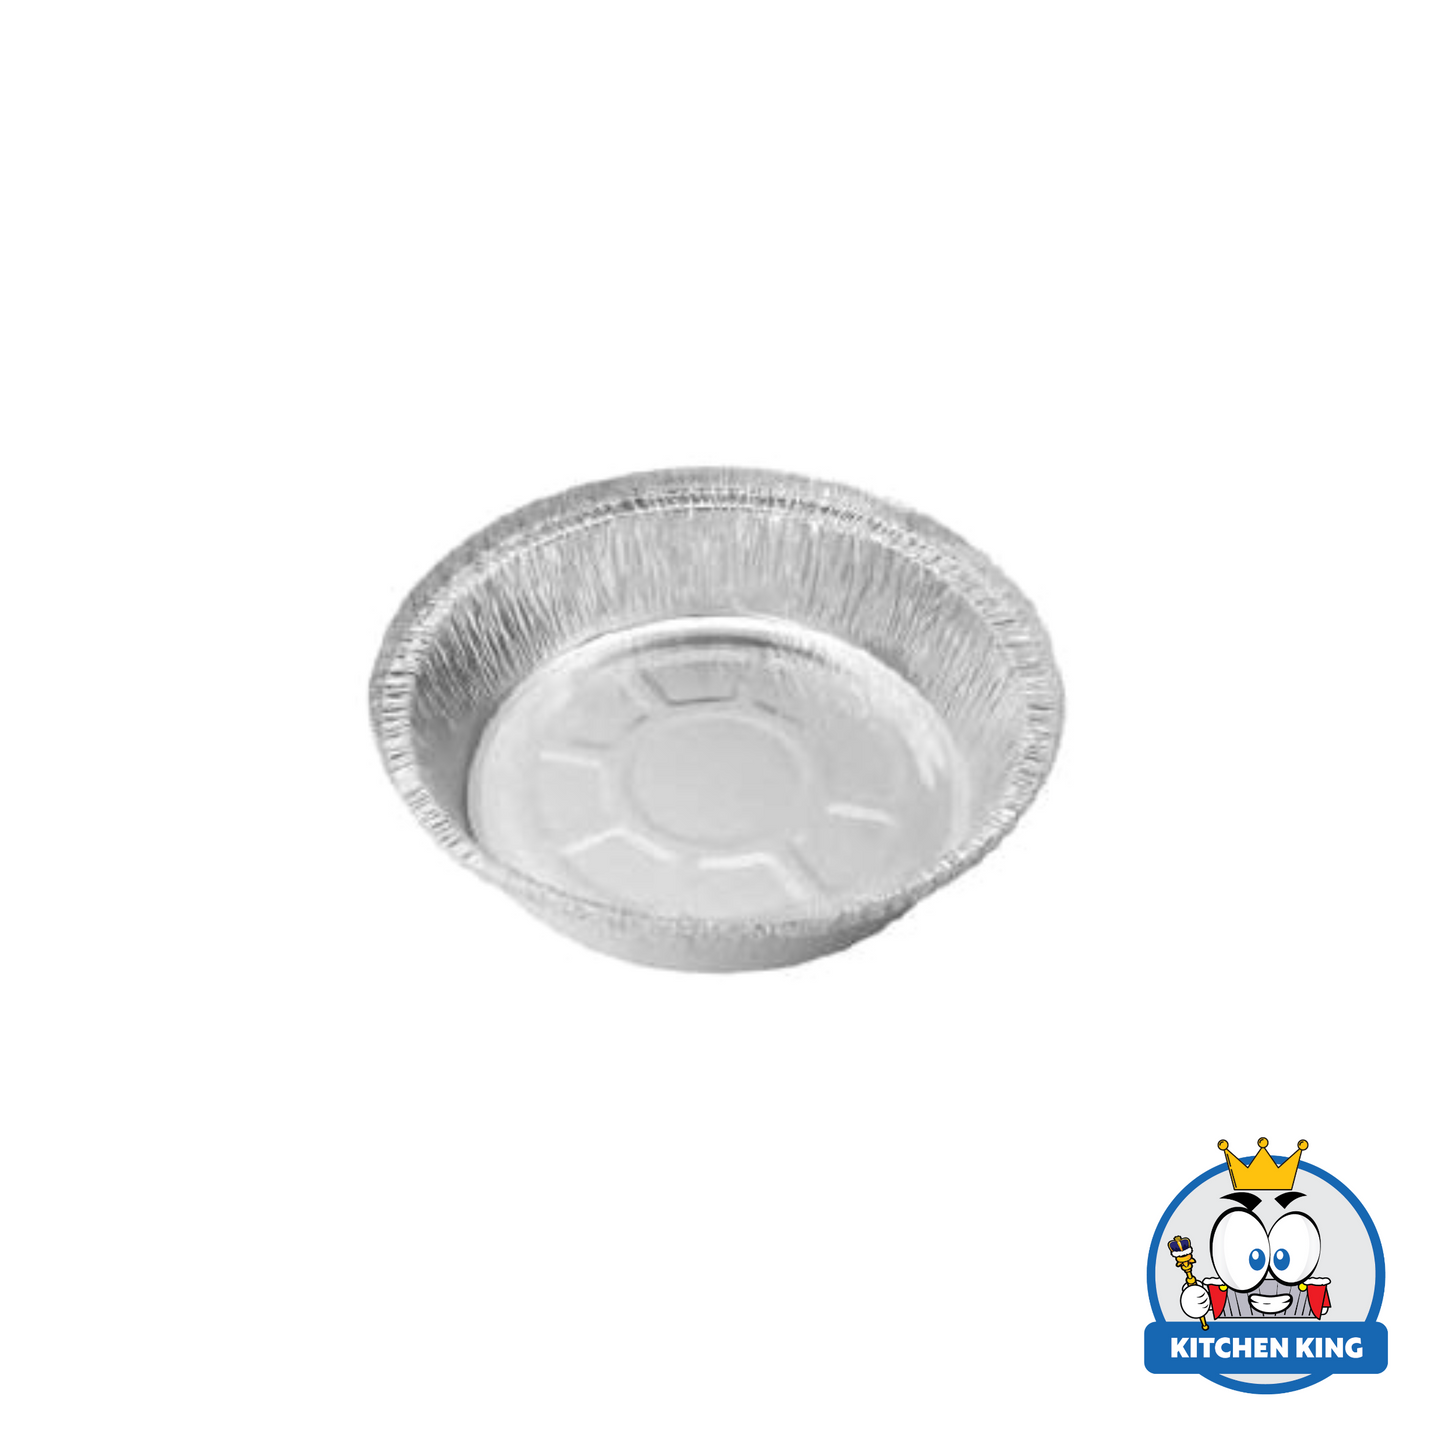 Aluminum Tray - Round Pans 750ml [RO7] with Plastic Lid